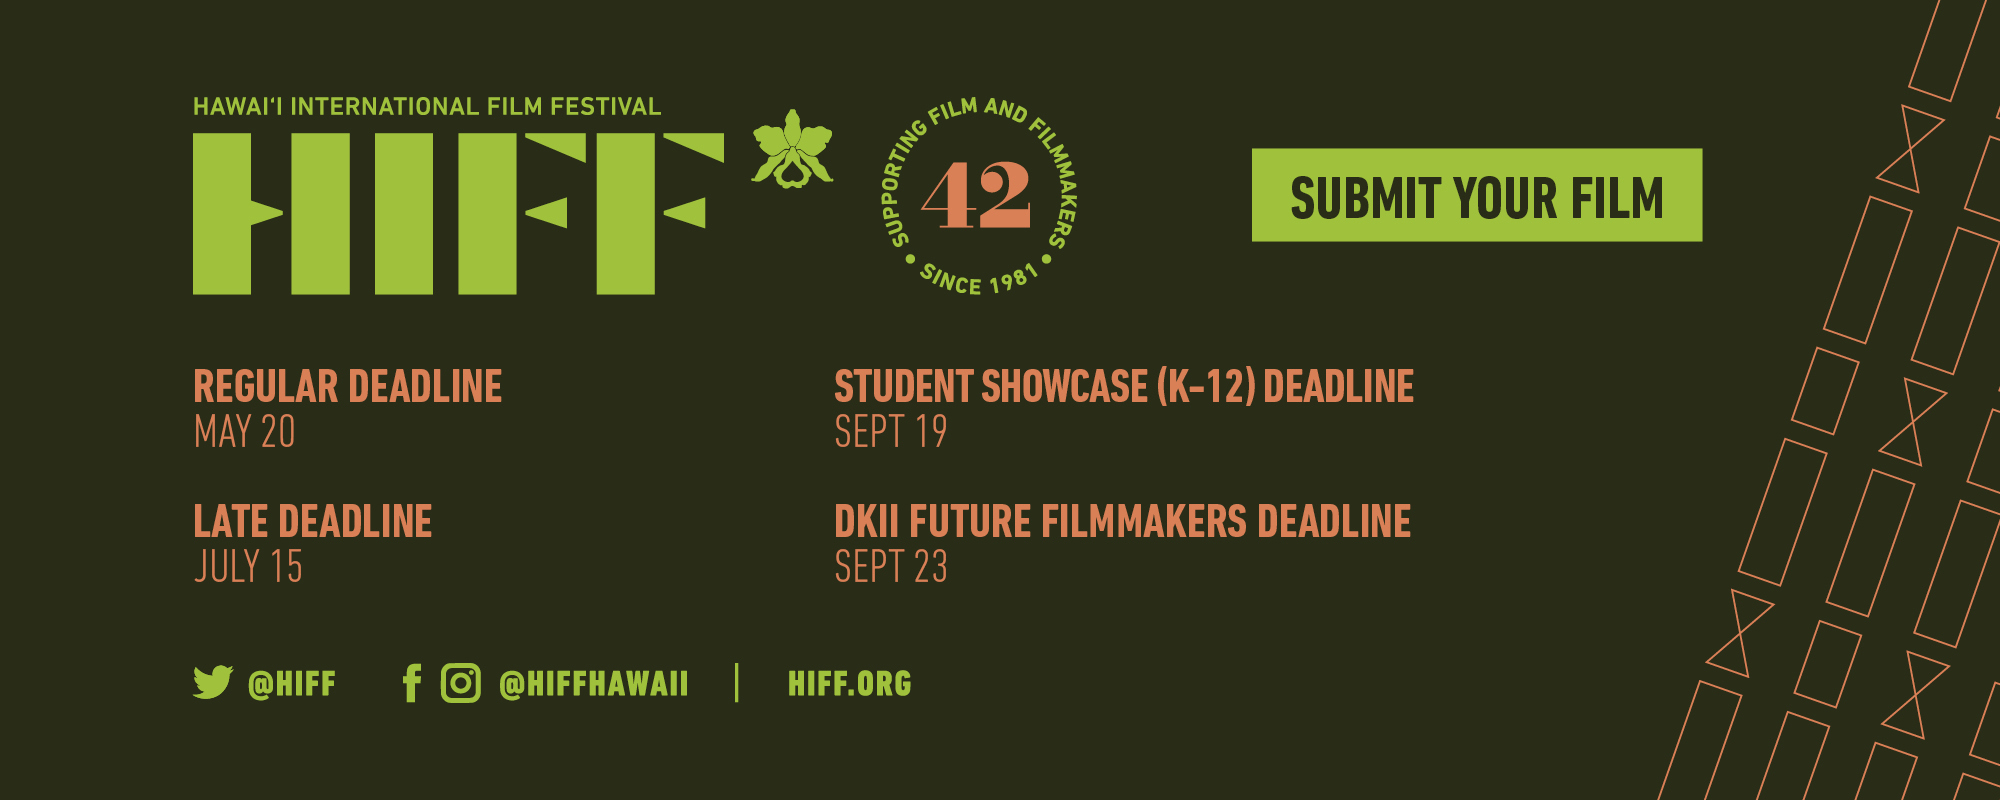 HIFF42 SUBMISSIONS